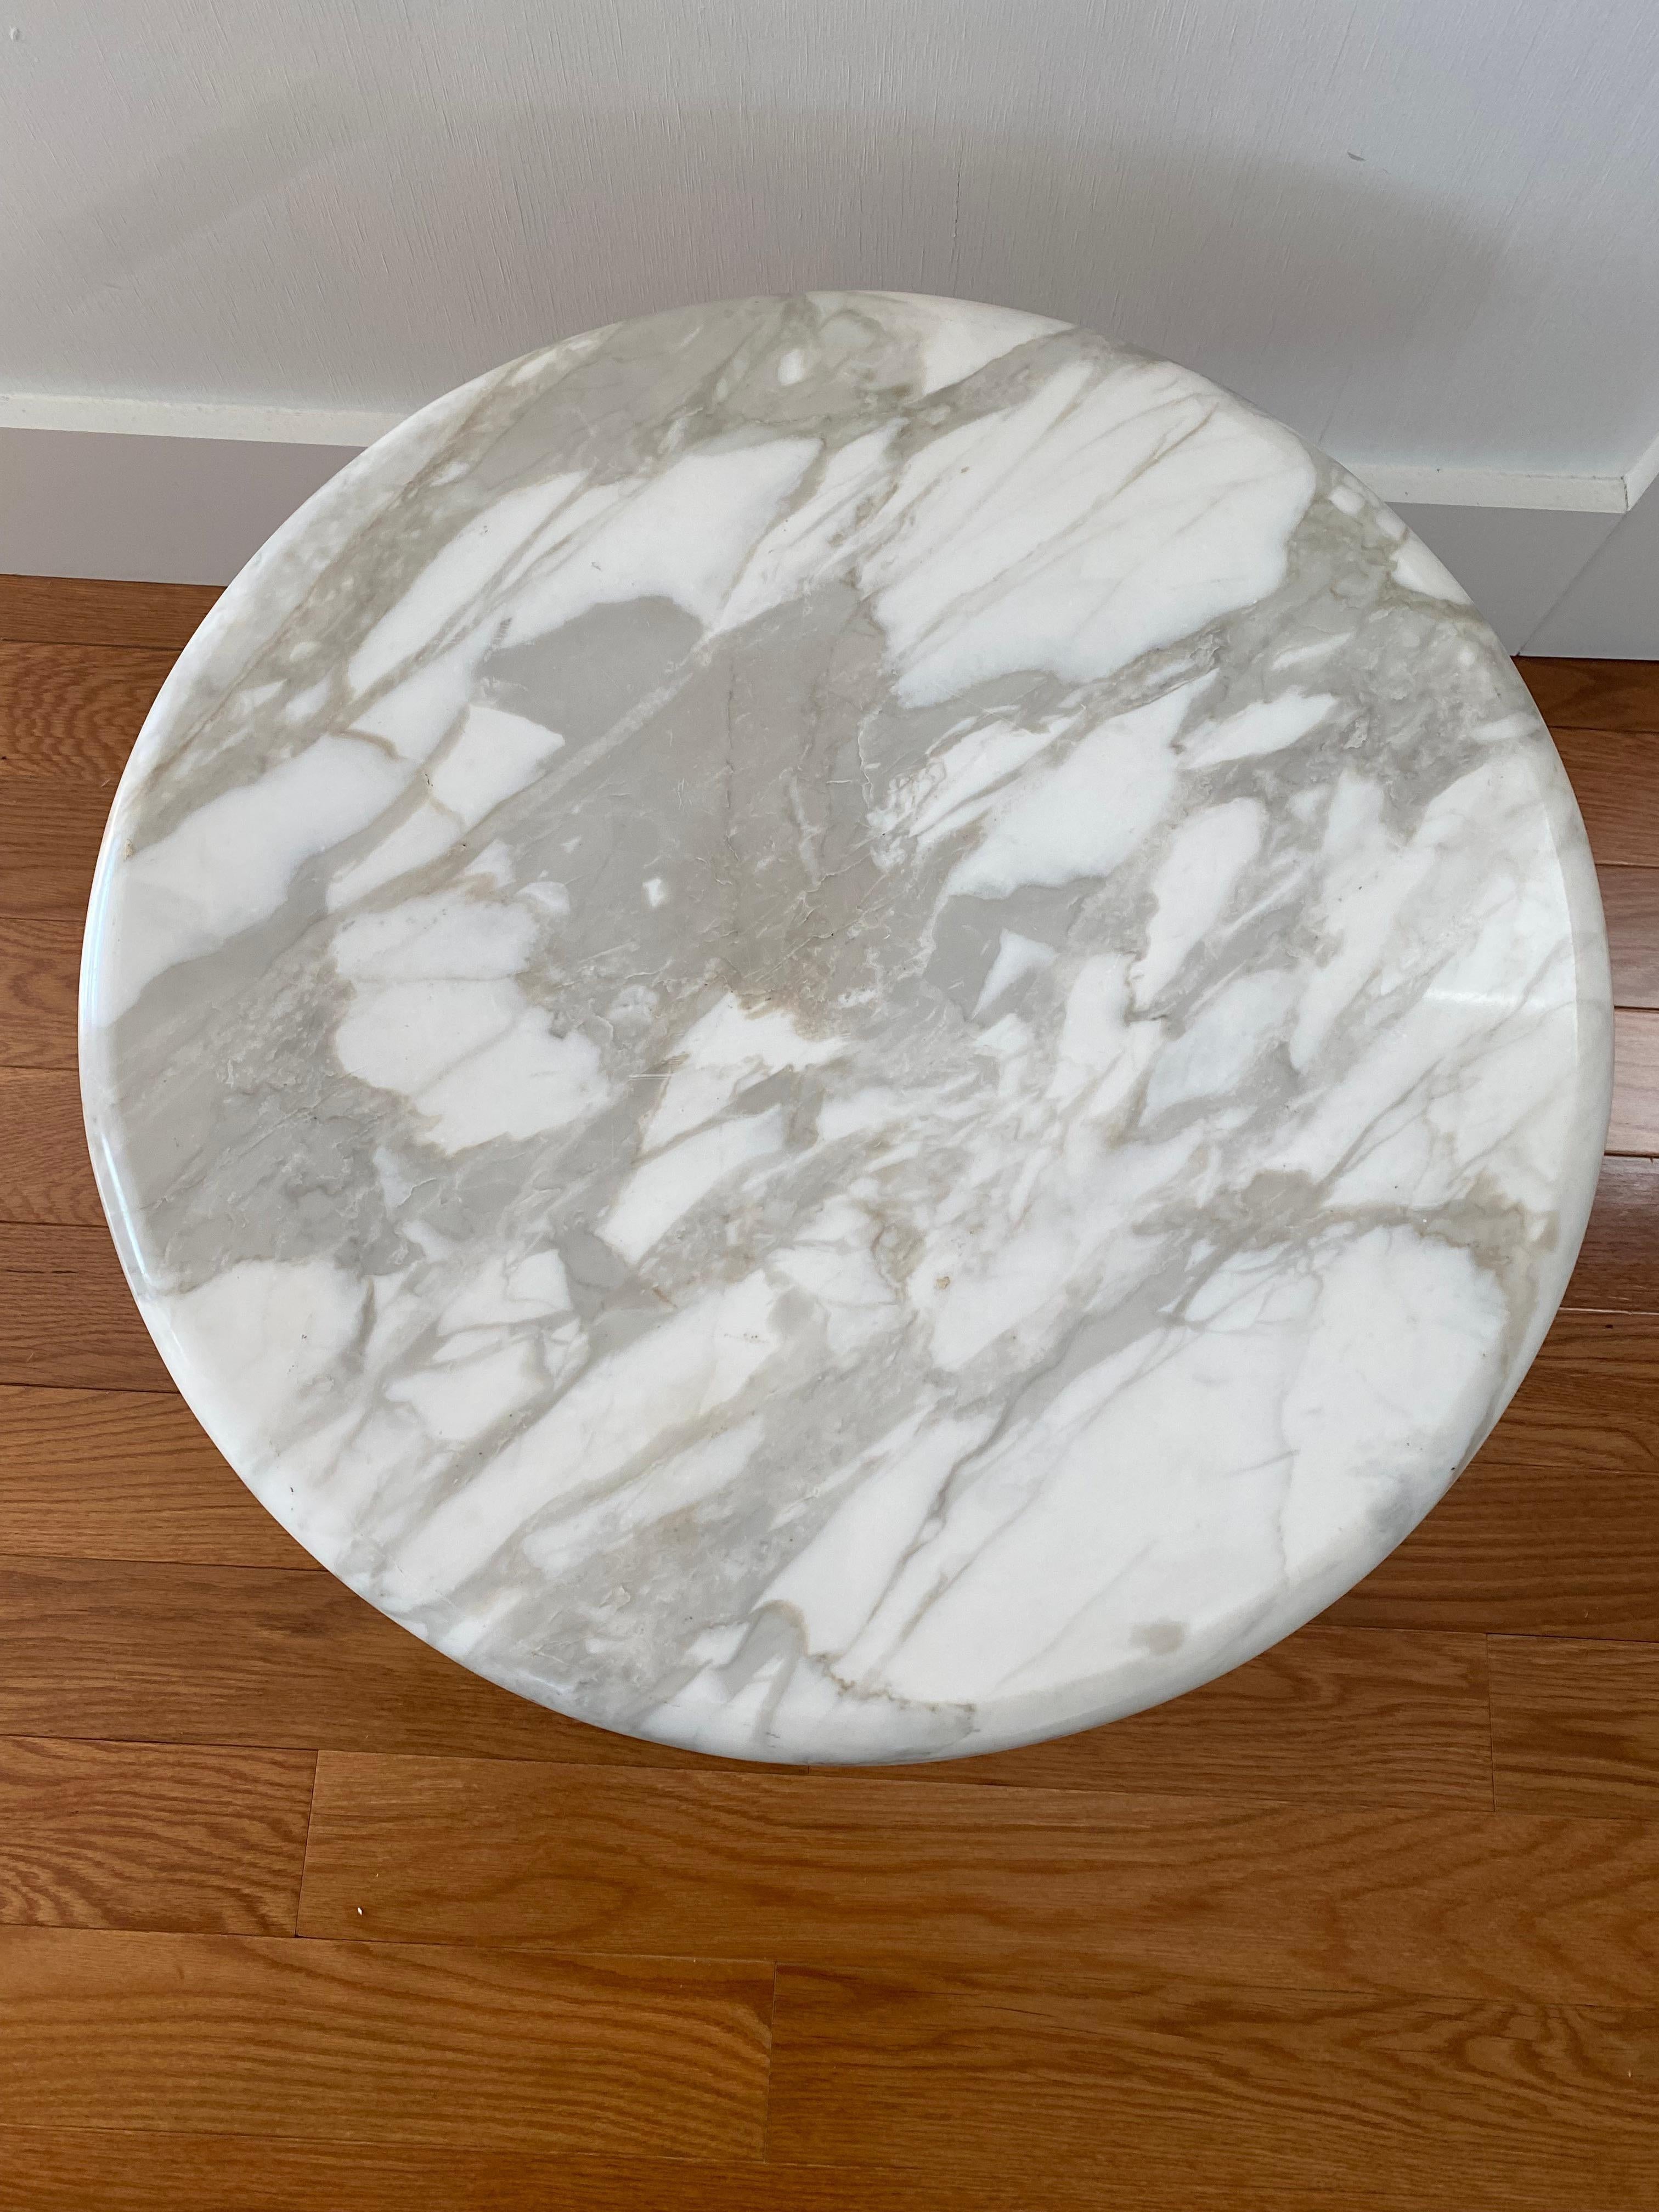 Unusual Zographos side or coffee table of carrara marble and stainless steel ALPHA cross base. Top quality piece and well crafted.

.